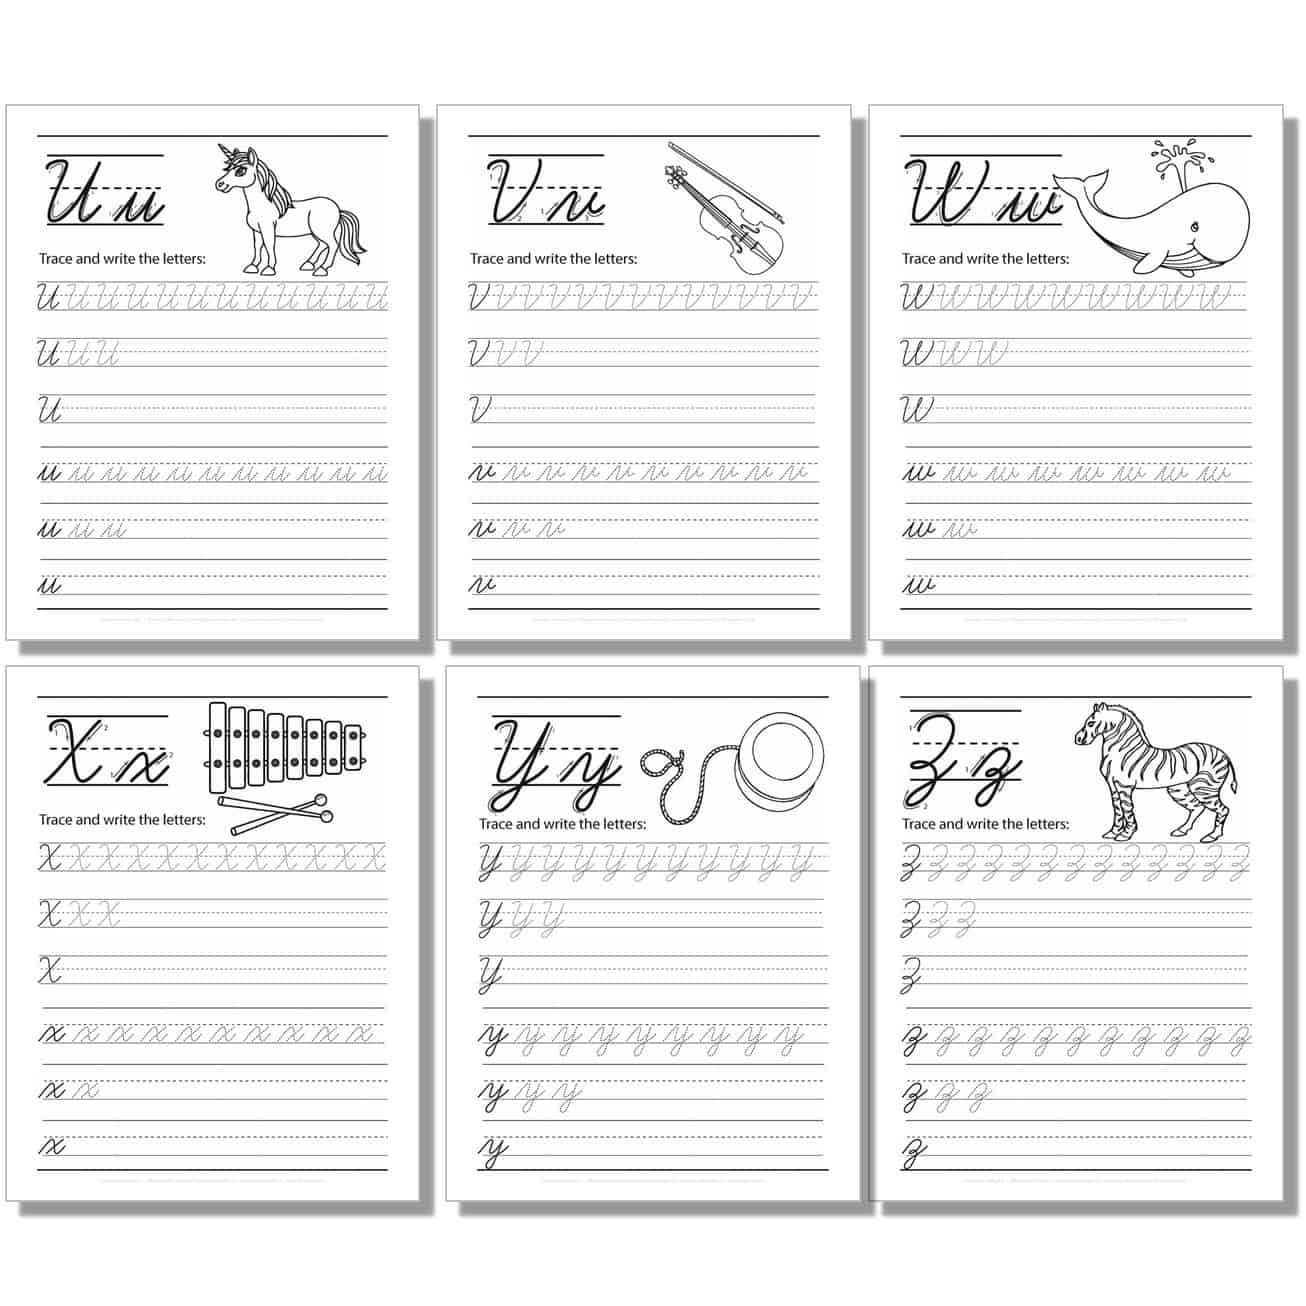 cursive worksheet with uppercase, lowercase letters for u, v, w, x, y, z.